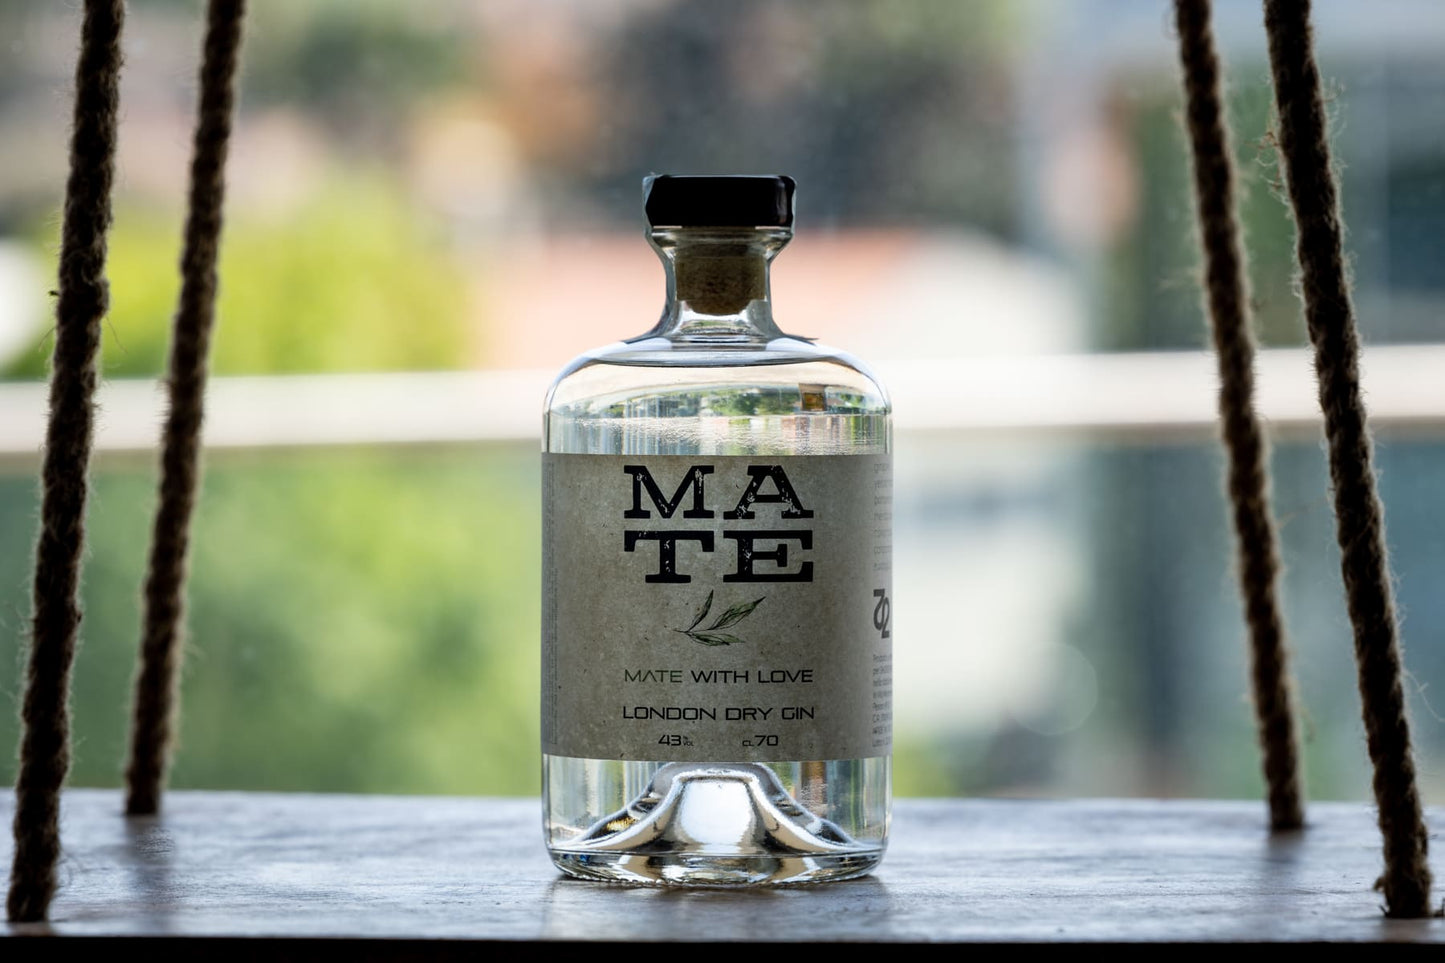 GIN MATE LONDON DRY - MATE CON AMOR 